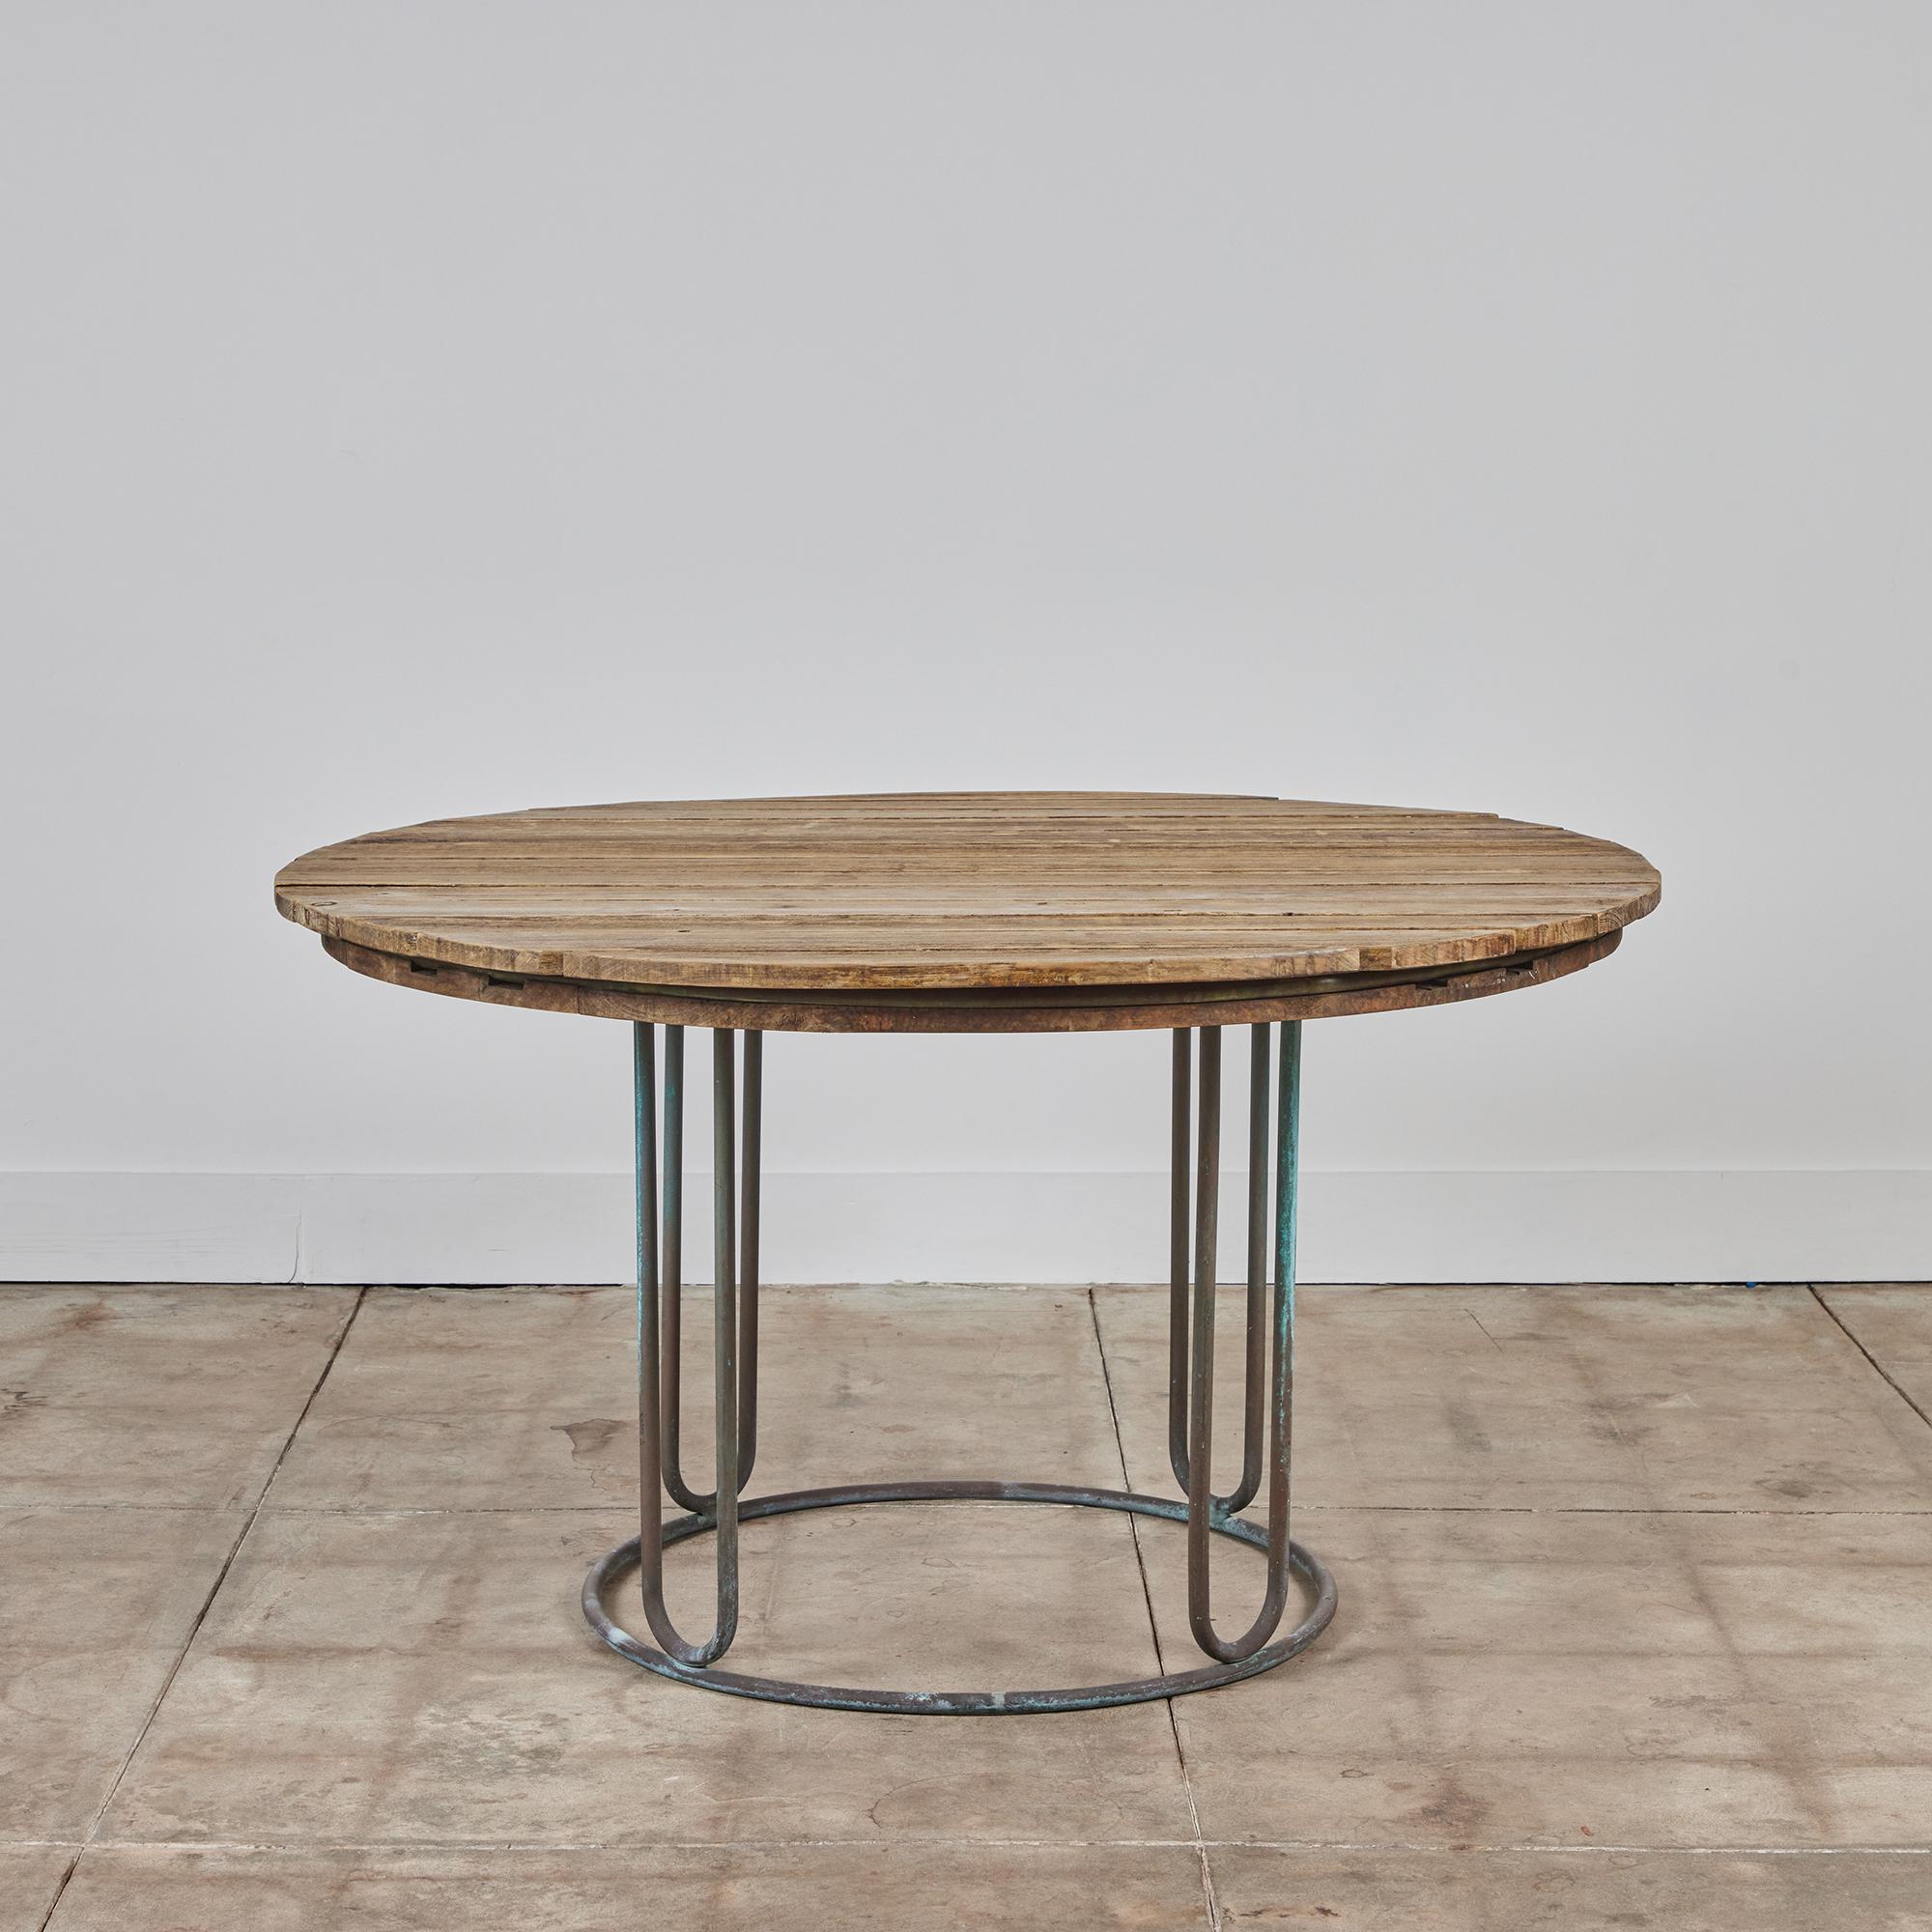 Round patio table designed by Walter Lamb and manufactured by Brown Jordan. The table has a slatted surface in the original weathered wood, mounted on a bronze base. Its subtle geometry suggests an Arts & Crafts sensibility, with radial supports and